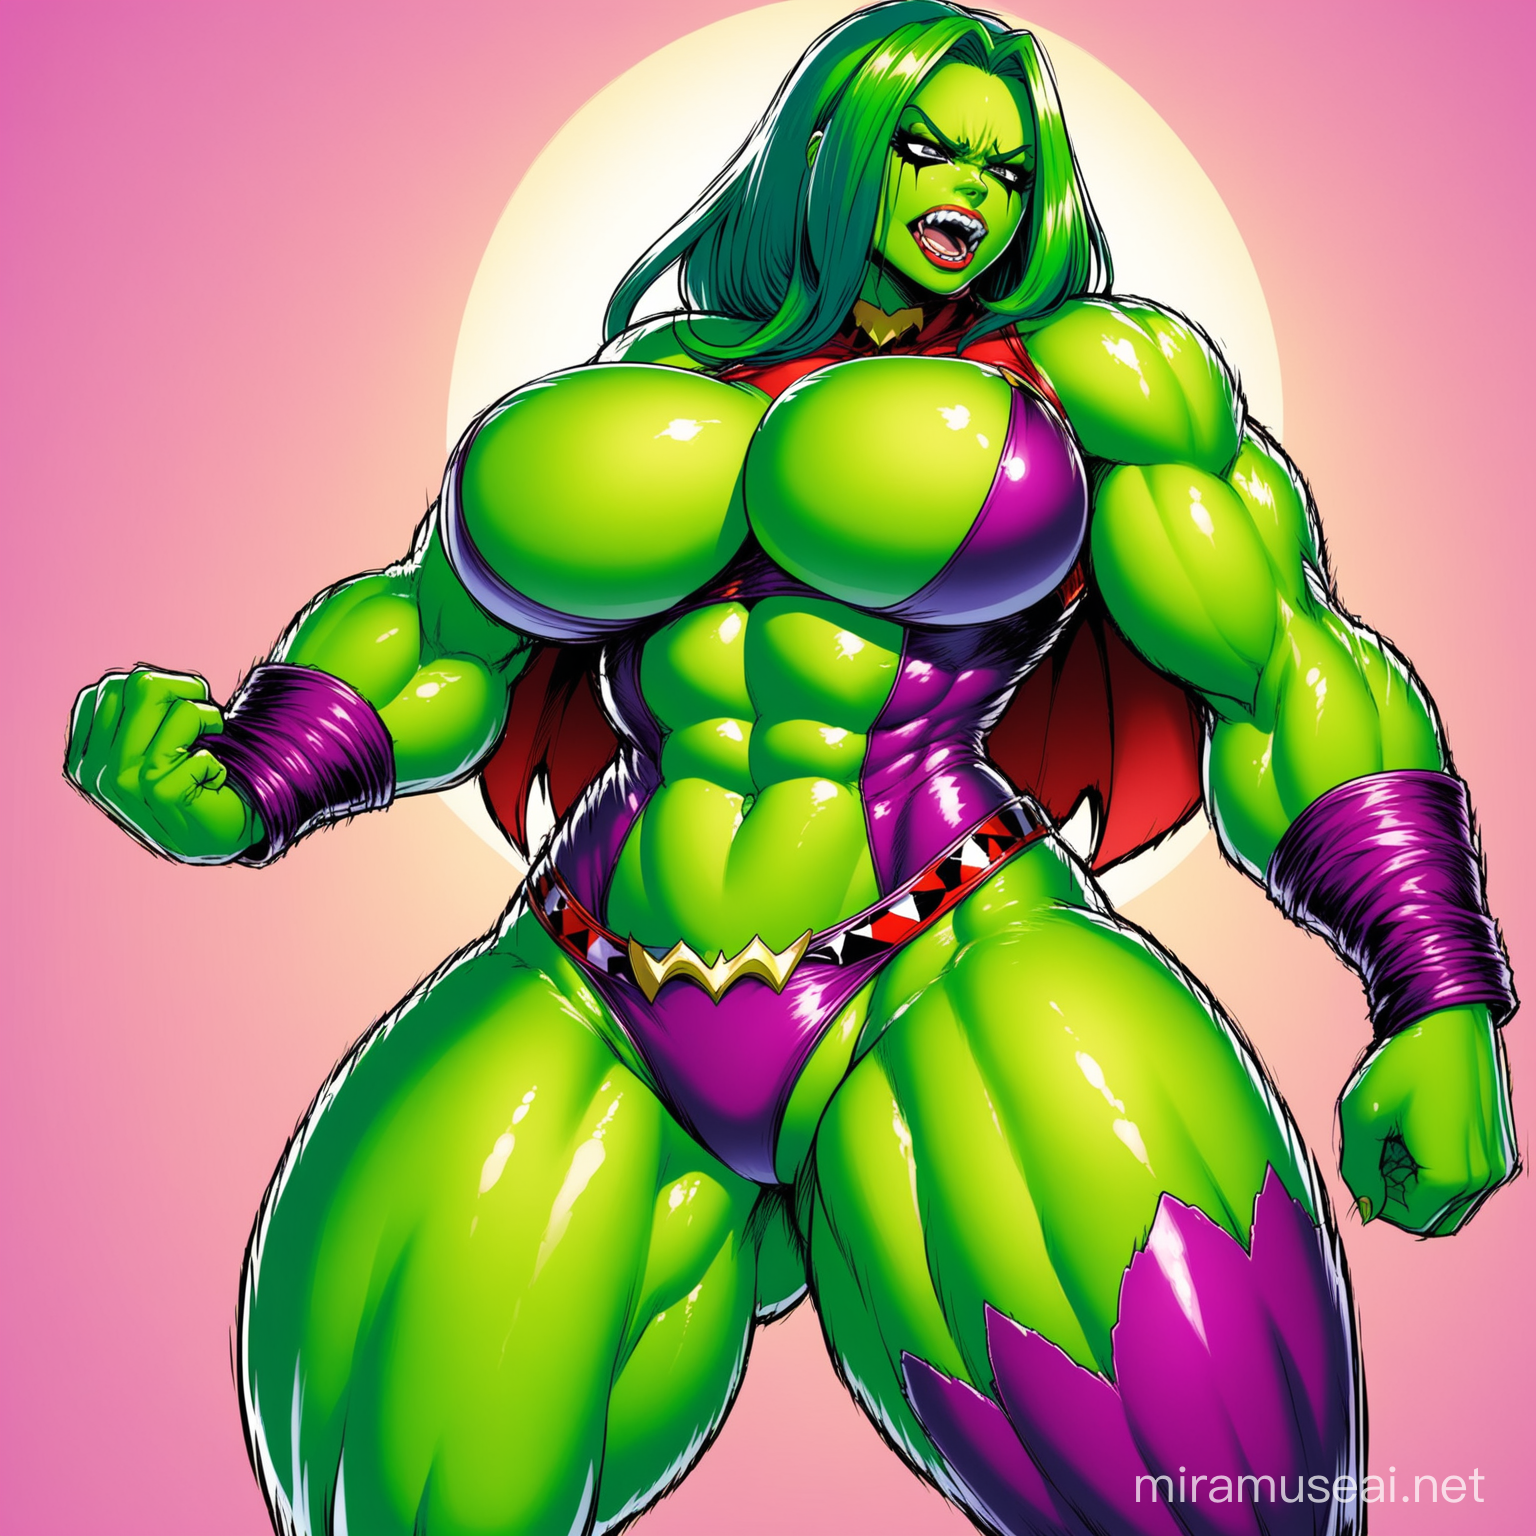 Harley quinn giant she hulk transformation, giant breast and muscle growth vs tiny batgirl 